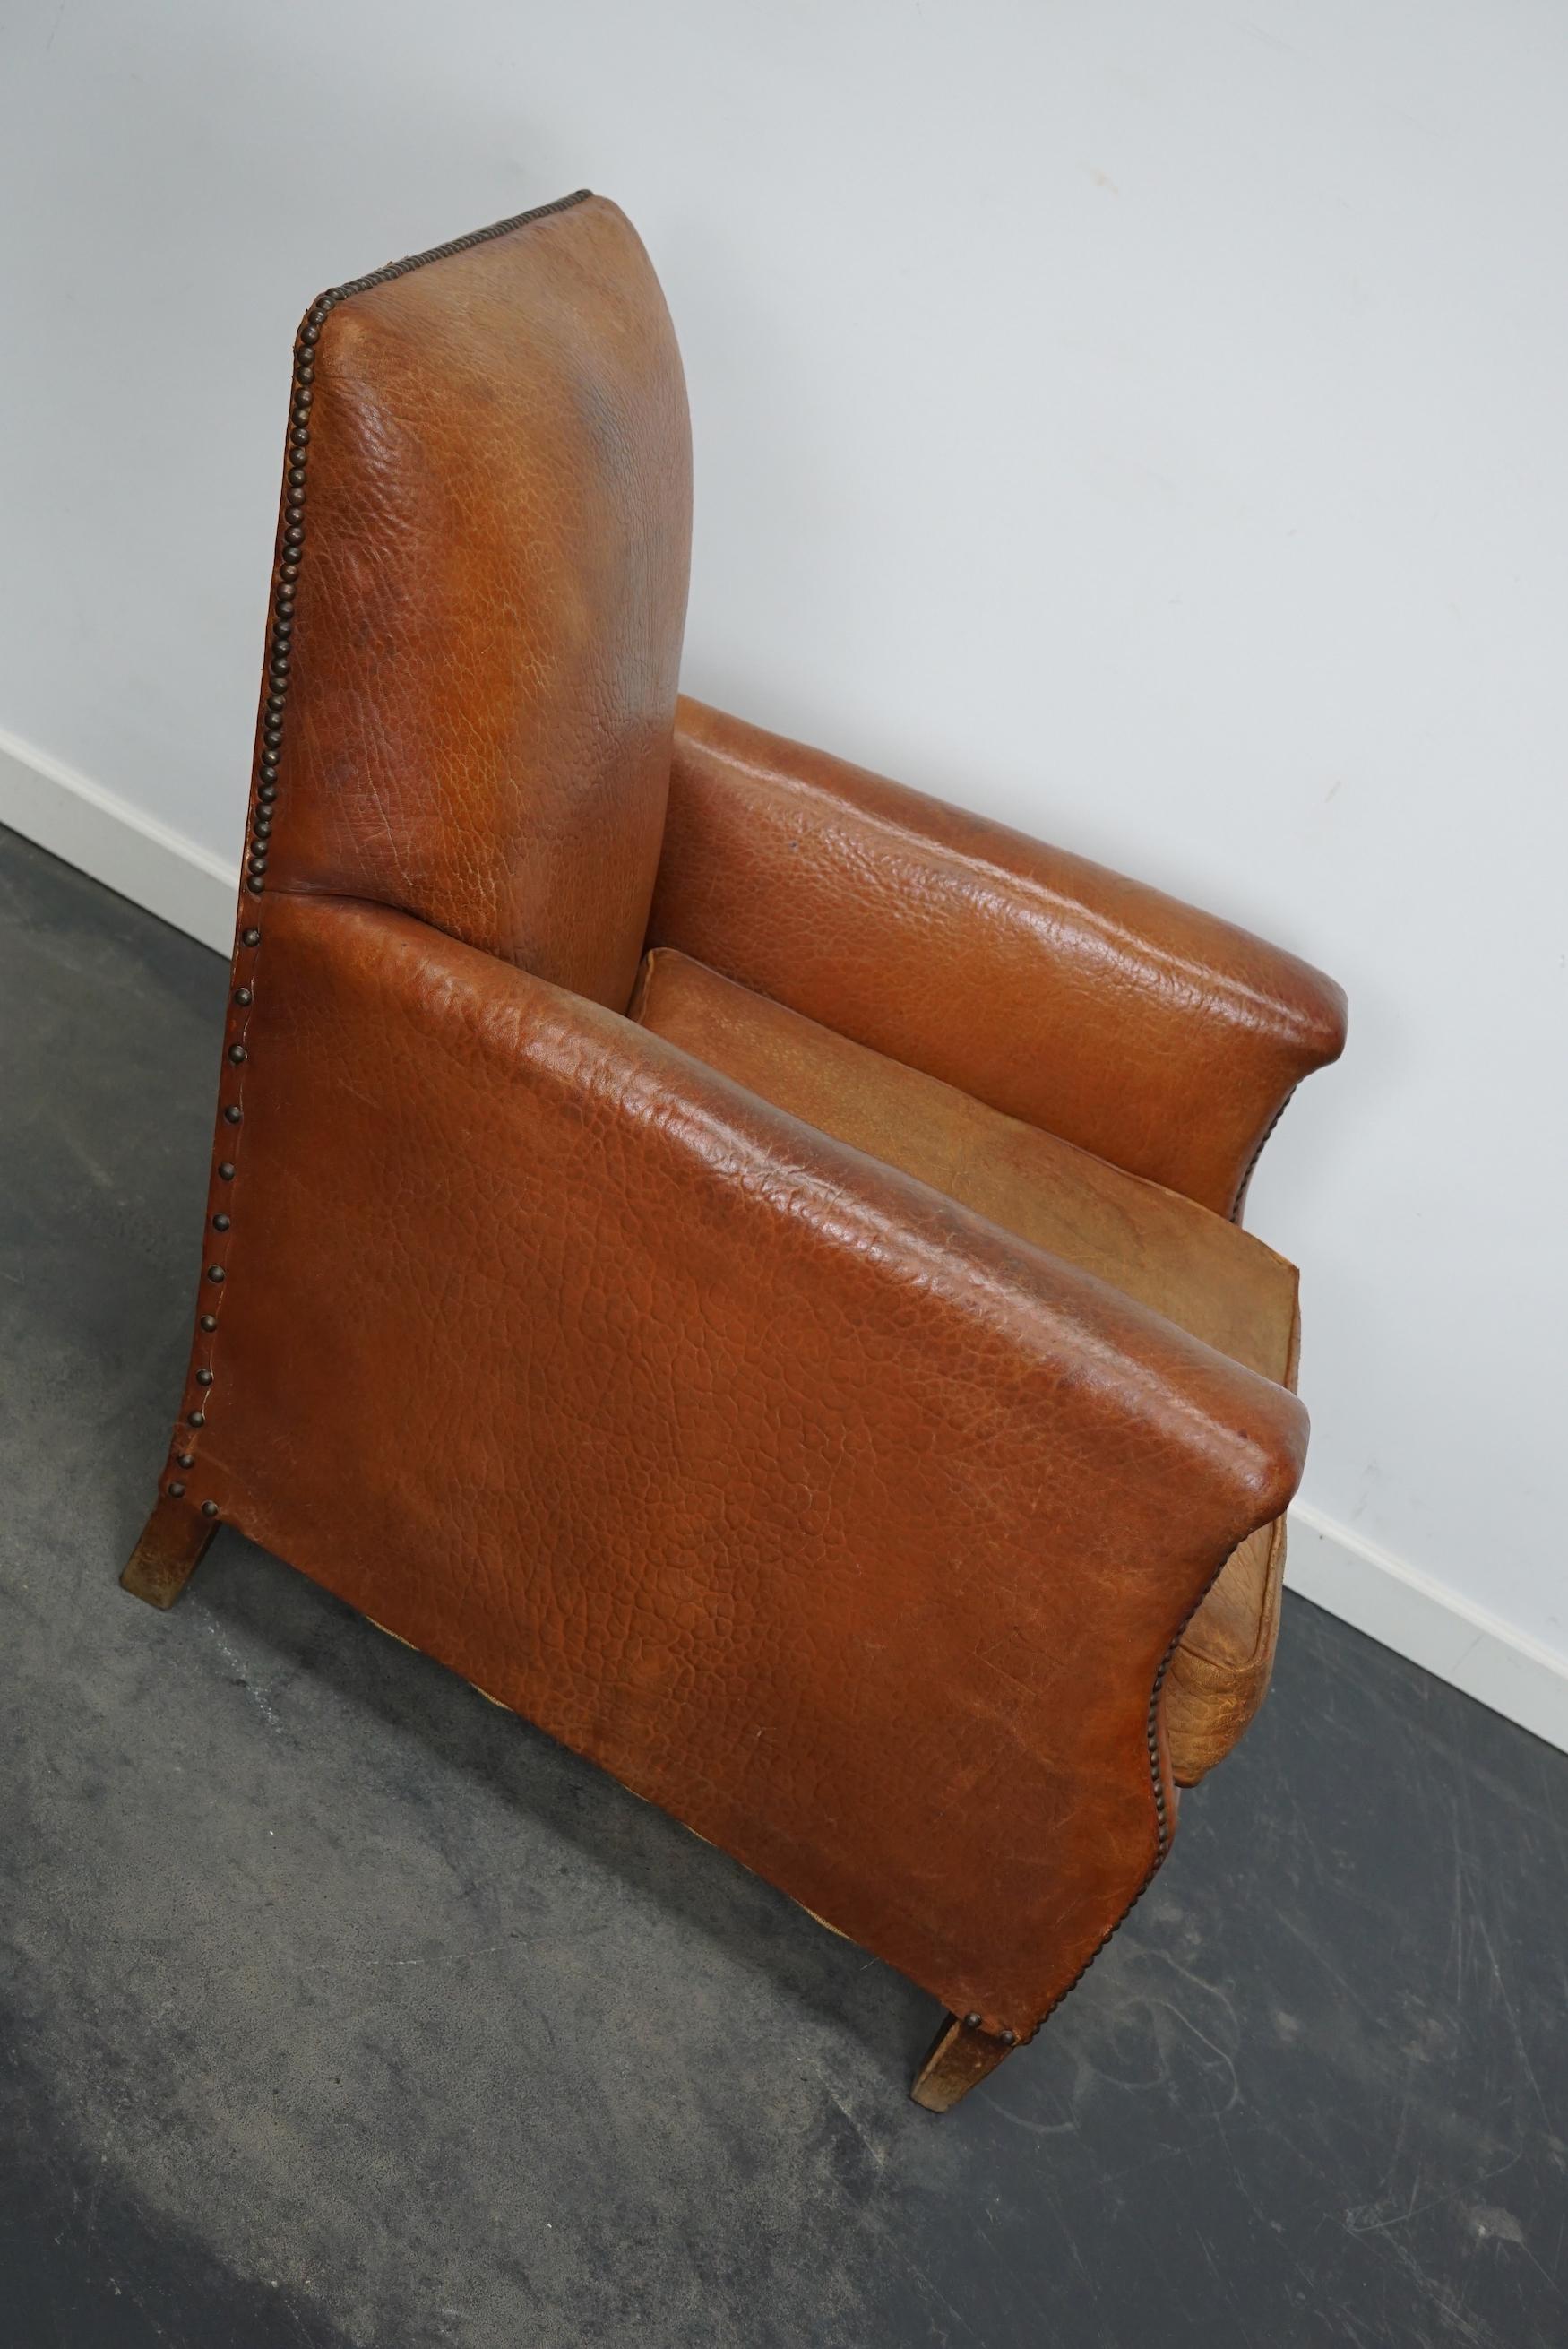 Vintage French Cognac-Colored Leather Club Chair, 1940s For Sale 2